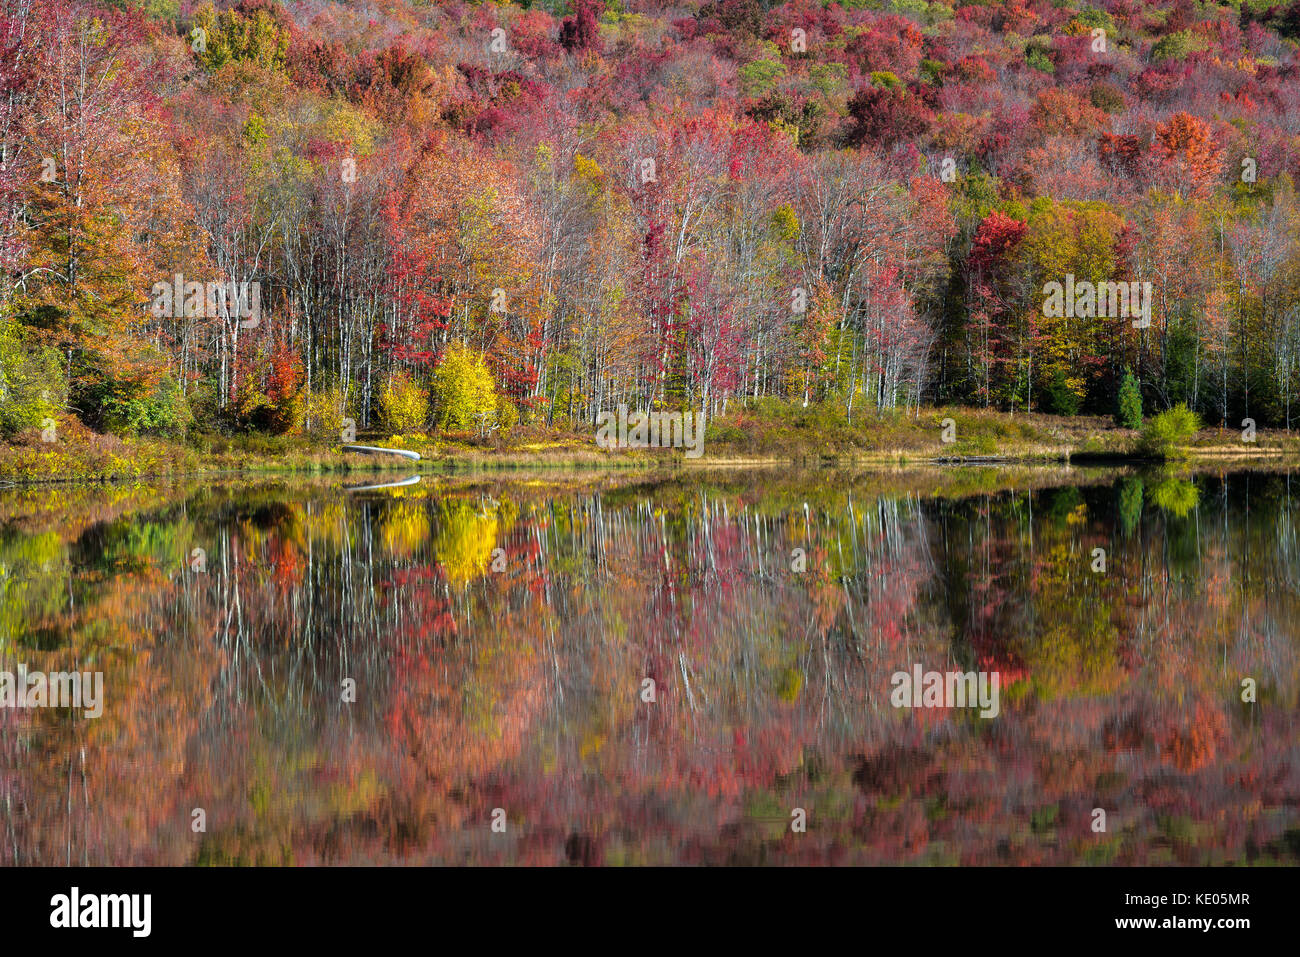 Colorful autumn foliage reflects on the smooth surface of a mountain lake in the Canaan Valley, West Virginia, USA Stock Photo